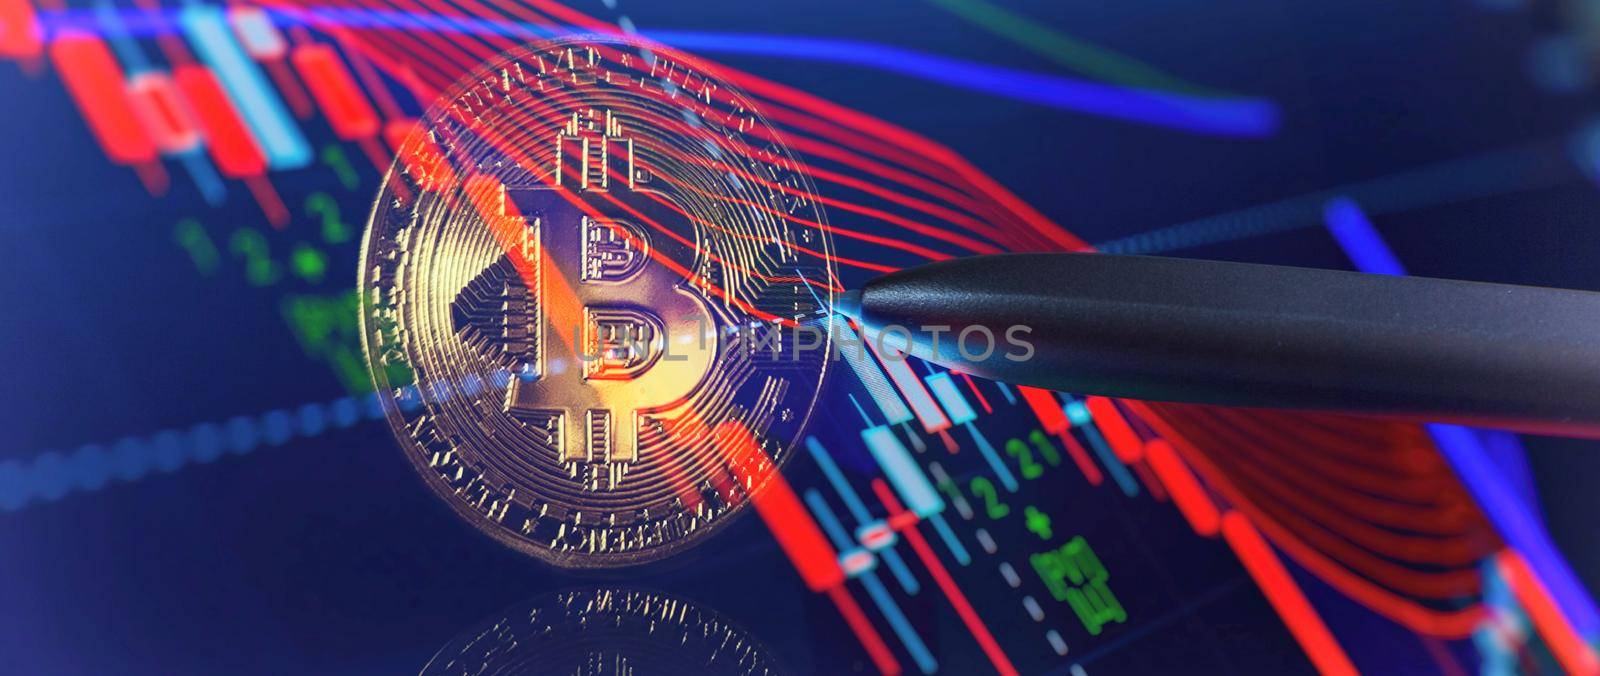 Bitcoin price crash in front of a red abstract virtual background. Stock Market Concept, digital money and stock business.